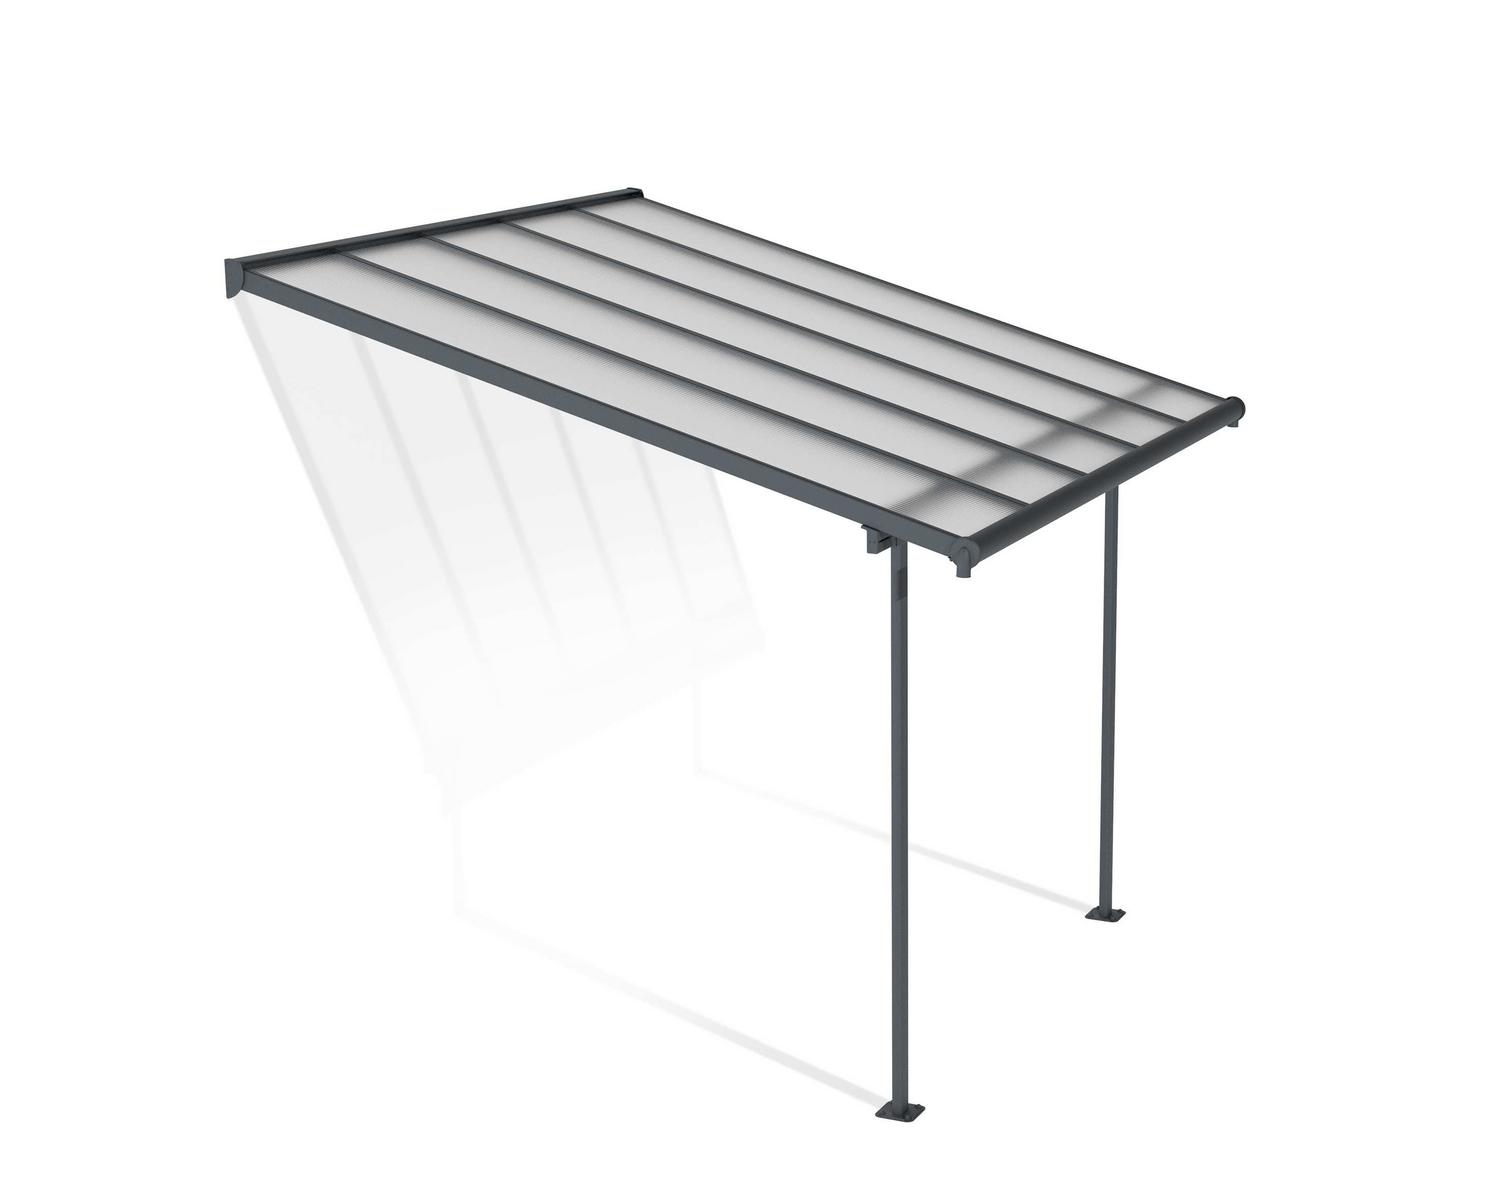 Sierra 10 Ft. X 10 Ft. Patio Cover Kit | Canopia By Palram